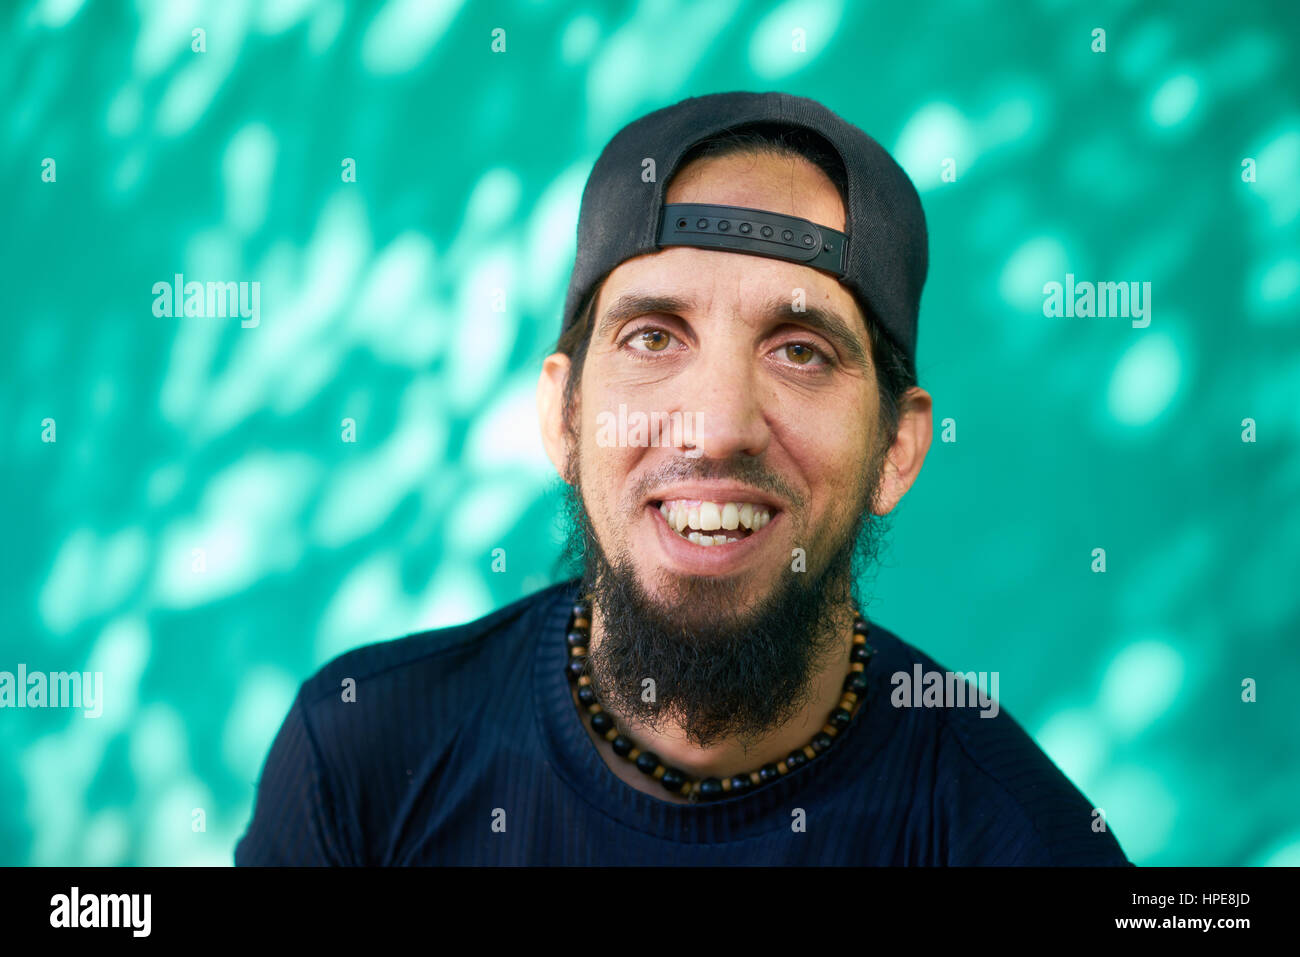 Real Cuban people and feelings, portrait of happy hispanic man with beard, baseball cap and long hair from Havana, Cuba looking at camera and laughing Stock Photo